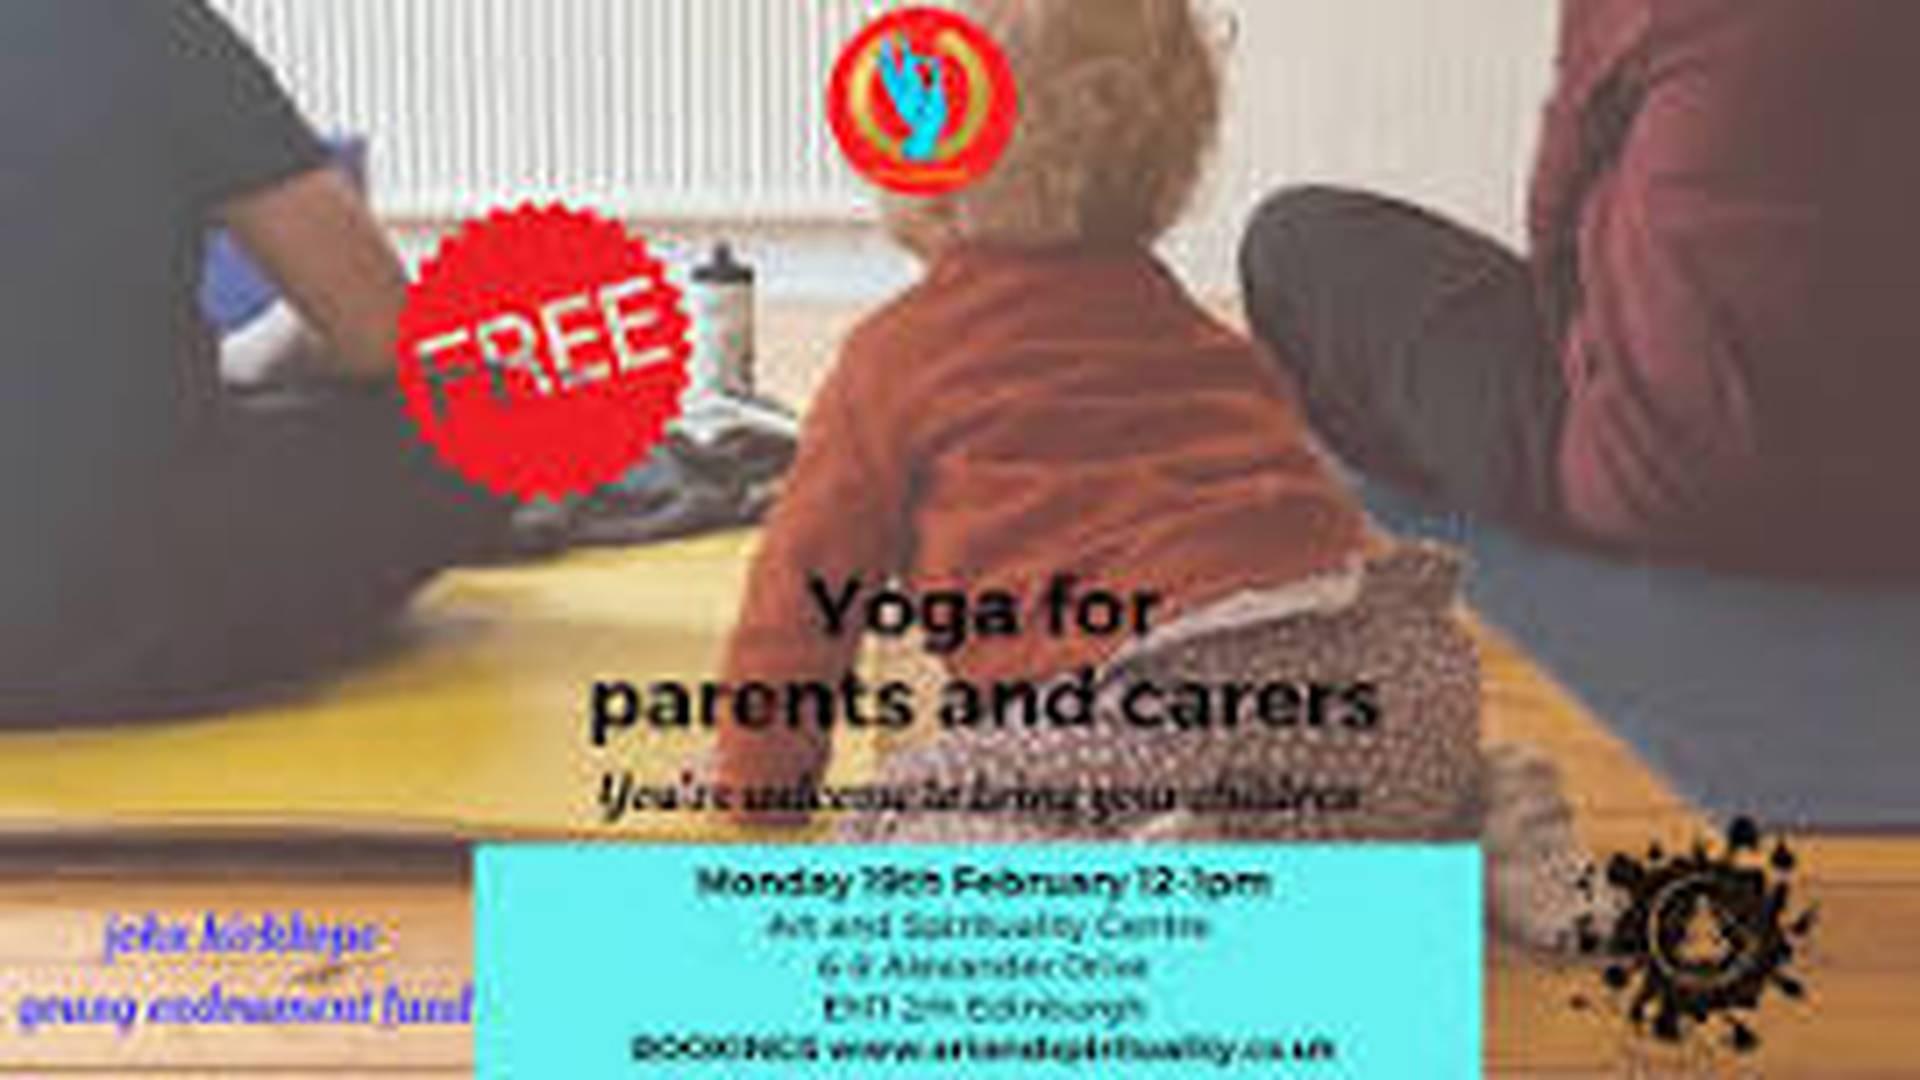 FREE Yoga for parents and carers-February photo